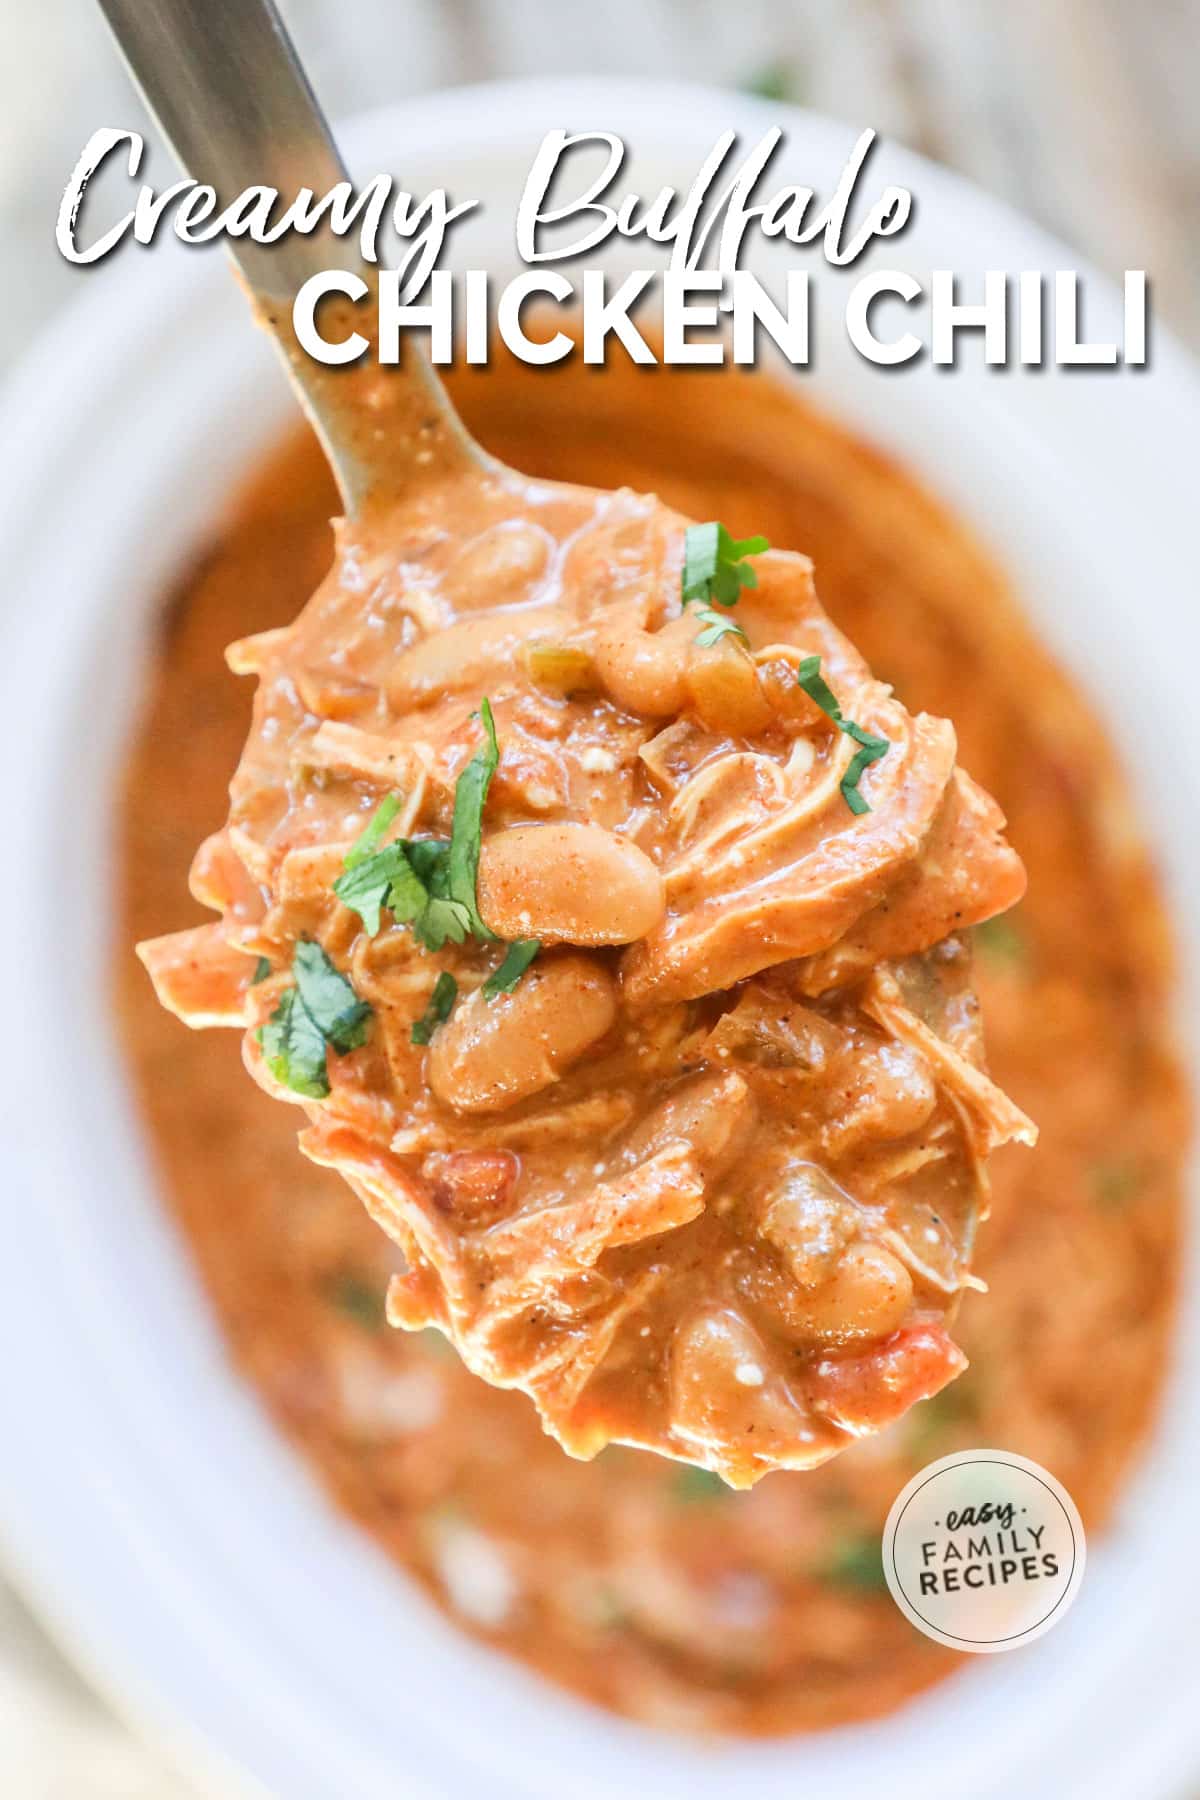 Spoonful of creamy buffalo chicken chili garnished with cilantro, held over crockpot of chili